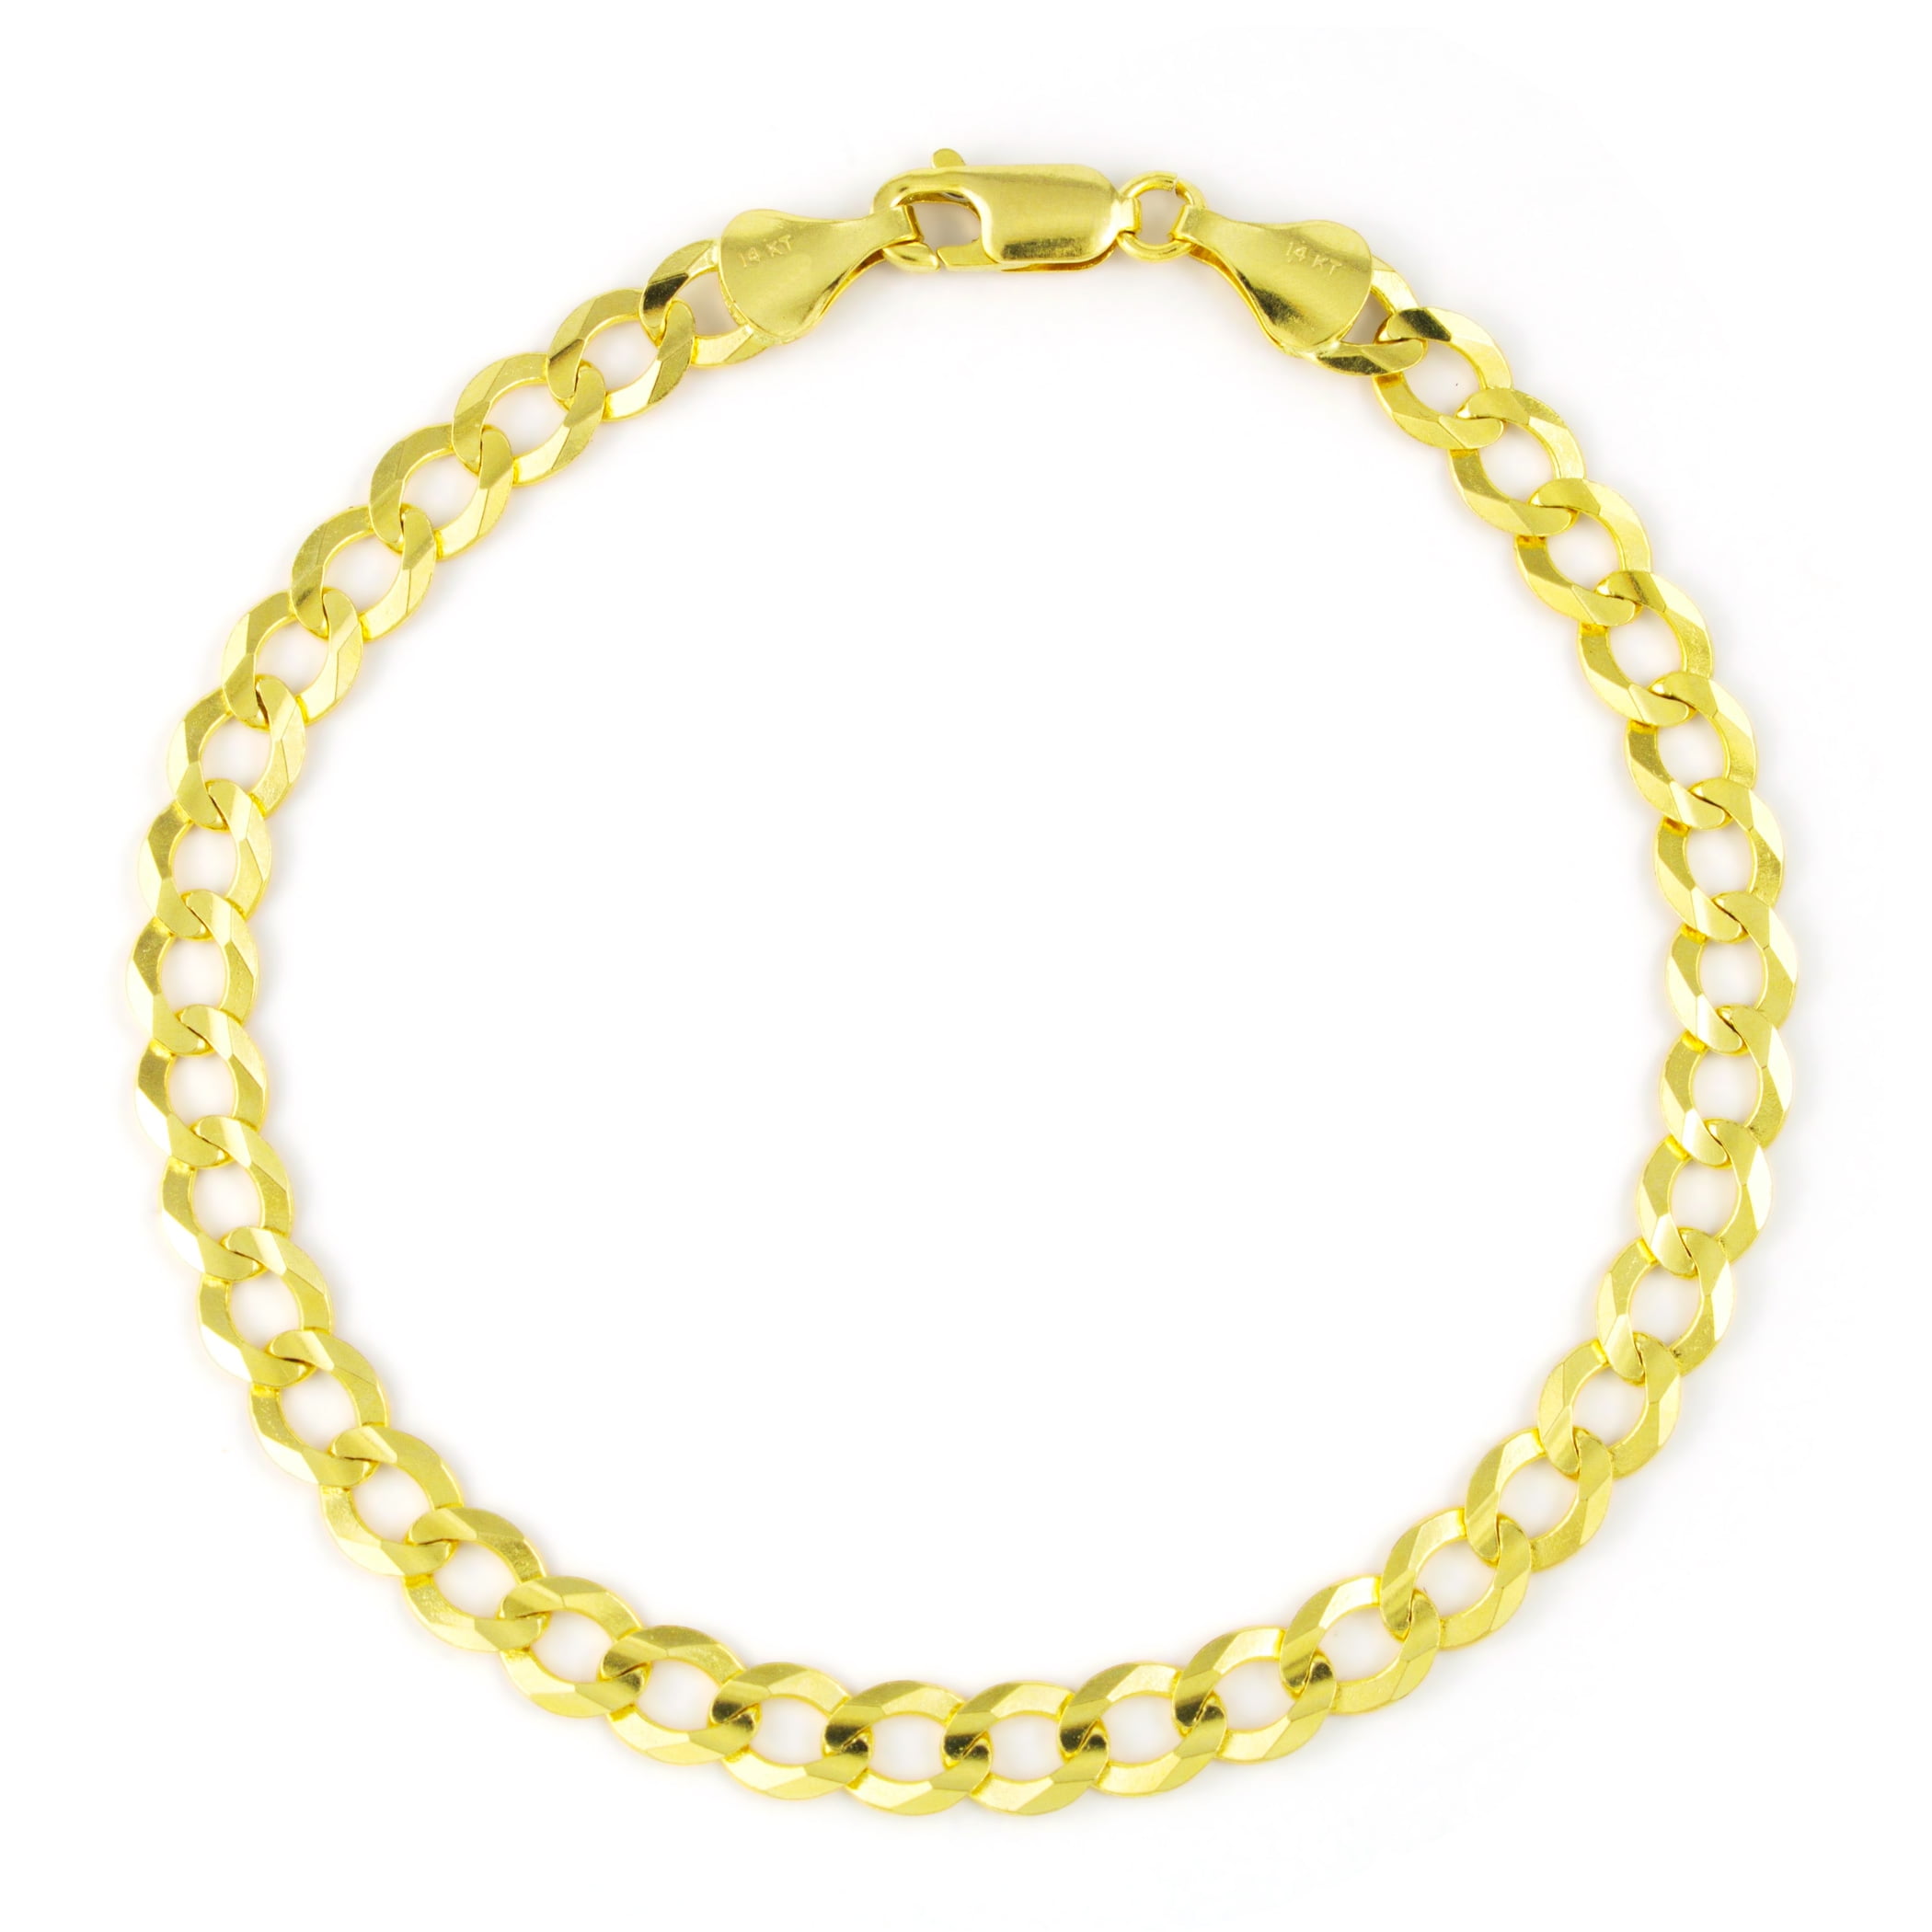 18K Gold Filled 6mm Curb Cuban Chain Anklet For Wholesale Dainty Ankle Bracelet Jewelry Making Supplies